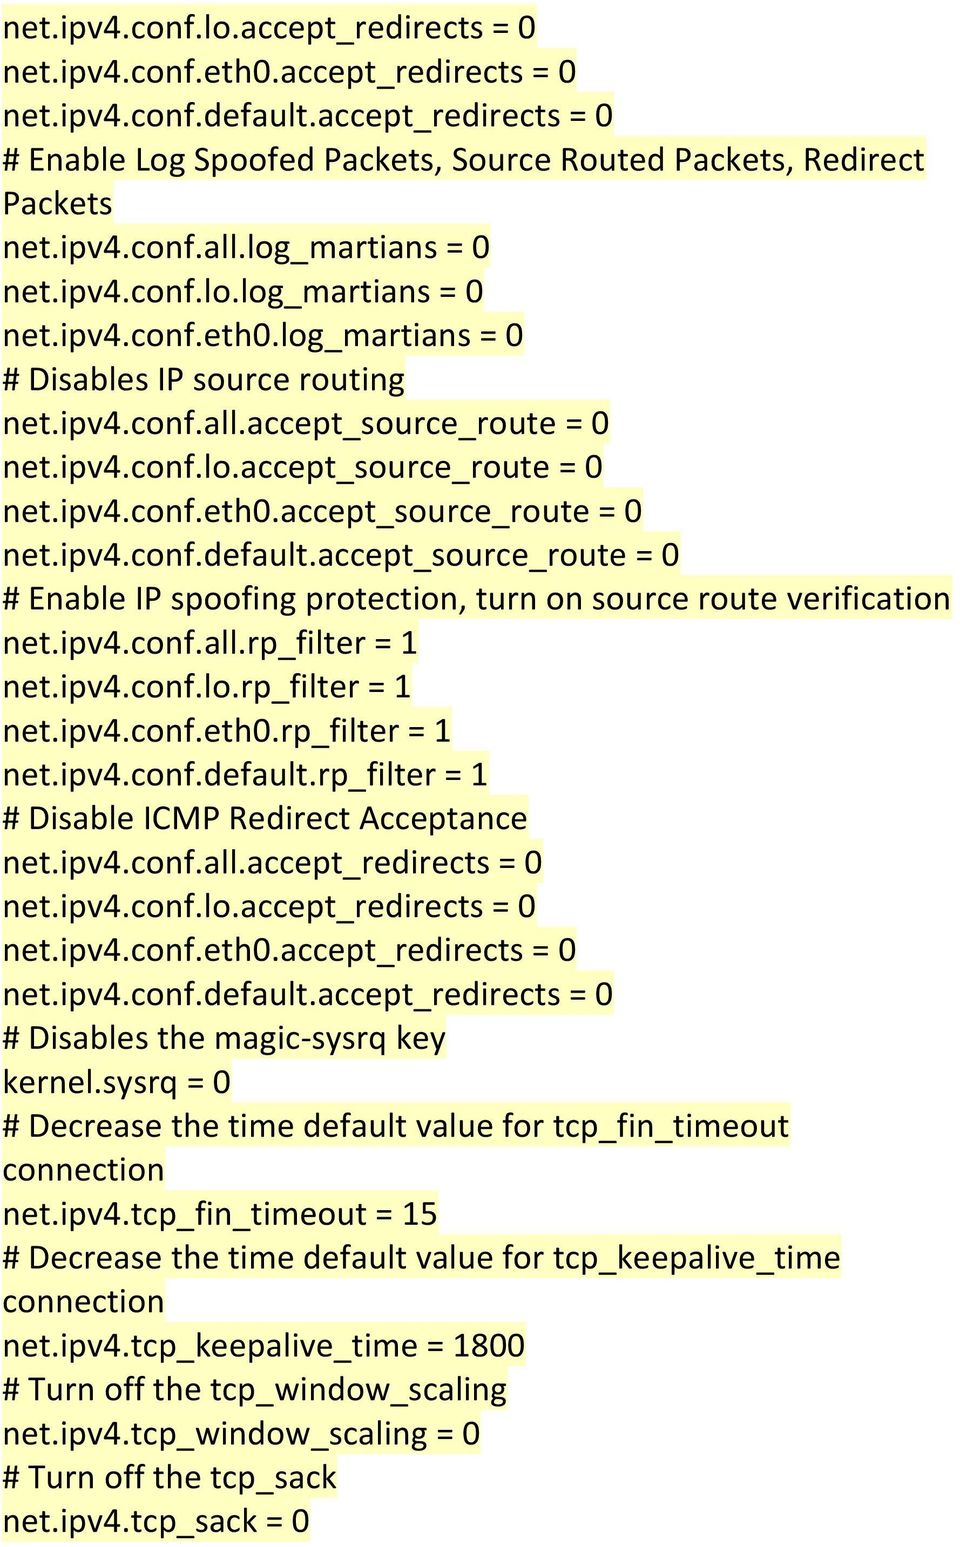 accept_source_route = 0 # Enable IP spoofing protection, turn on source route verification net.ipv4.conf.all.rp_filter = 1 net.ipv4.conf.lo.rp_filter = 1 net.ipv4.conf.eth0.rp_filter = 1 net.ipv4.conf.default.